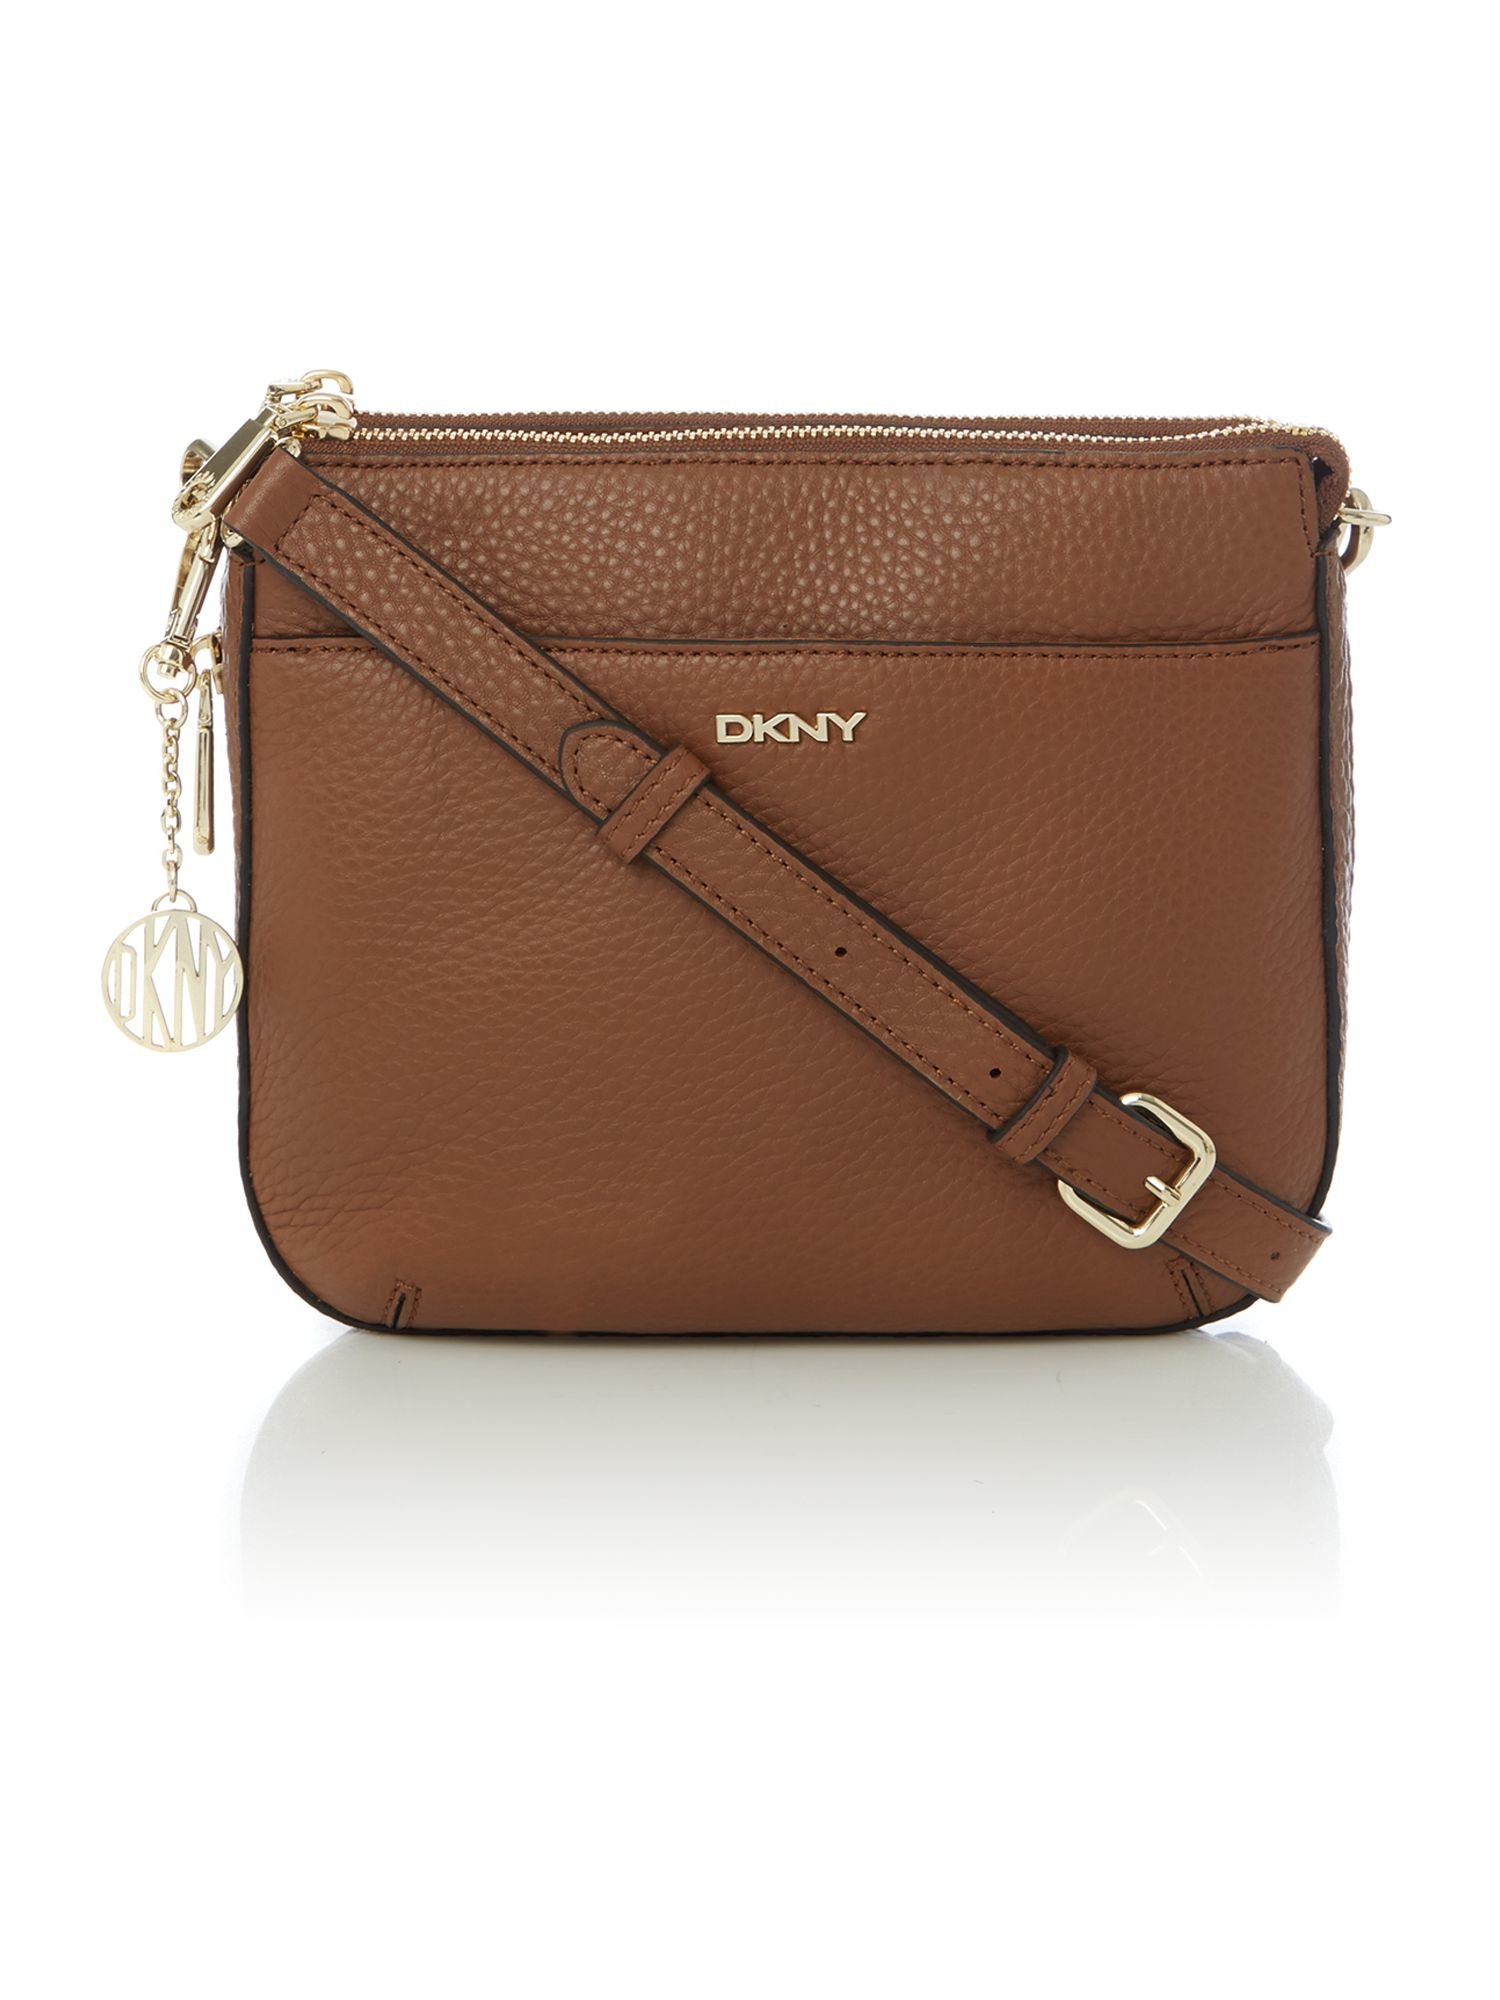 DKNY Tribeca Tan Double Zip Rounded Cross Body Bag in Brown - Lyst